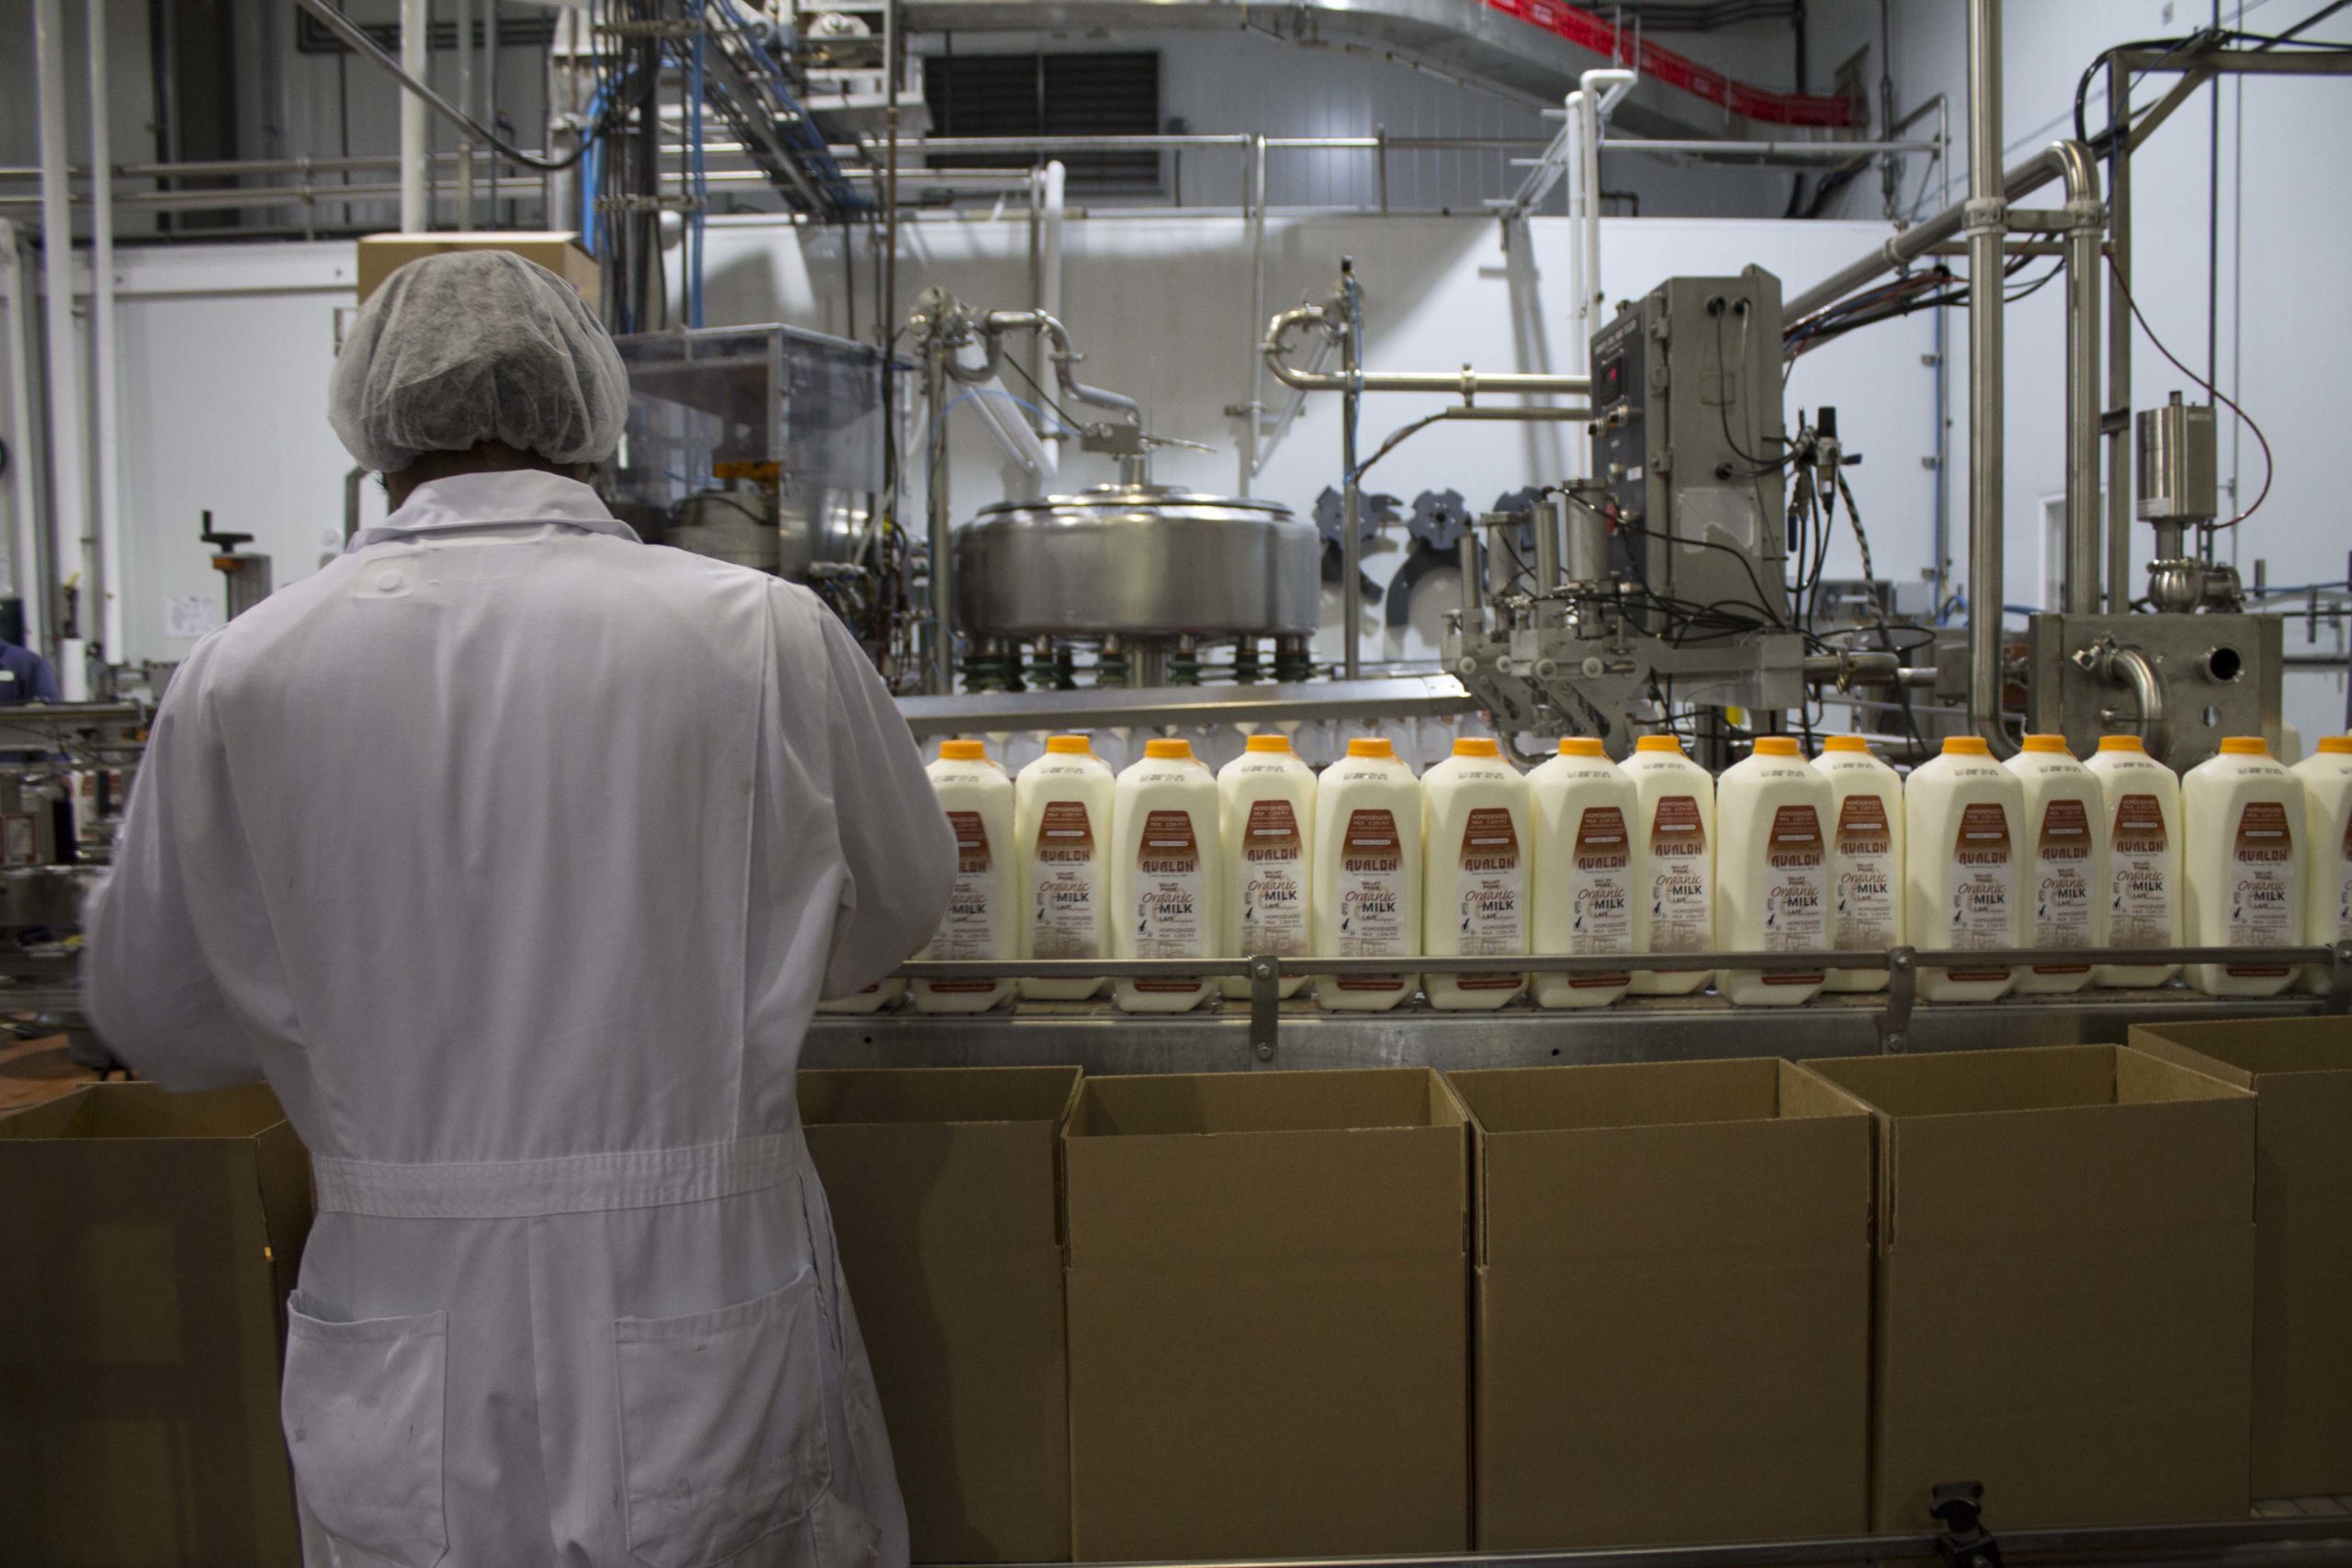 Milk is bottled and ready to be packed and shipped to stores.